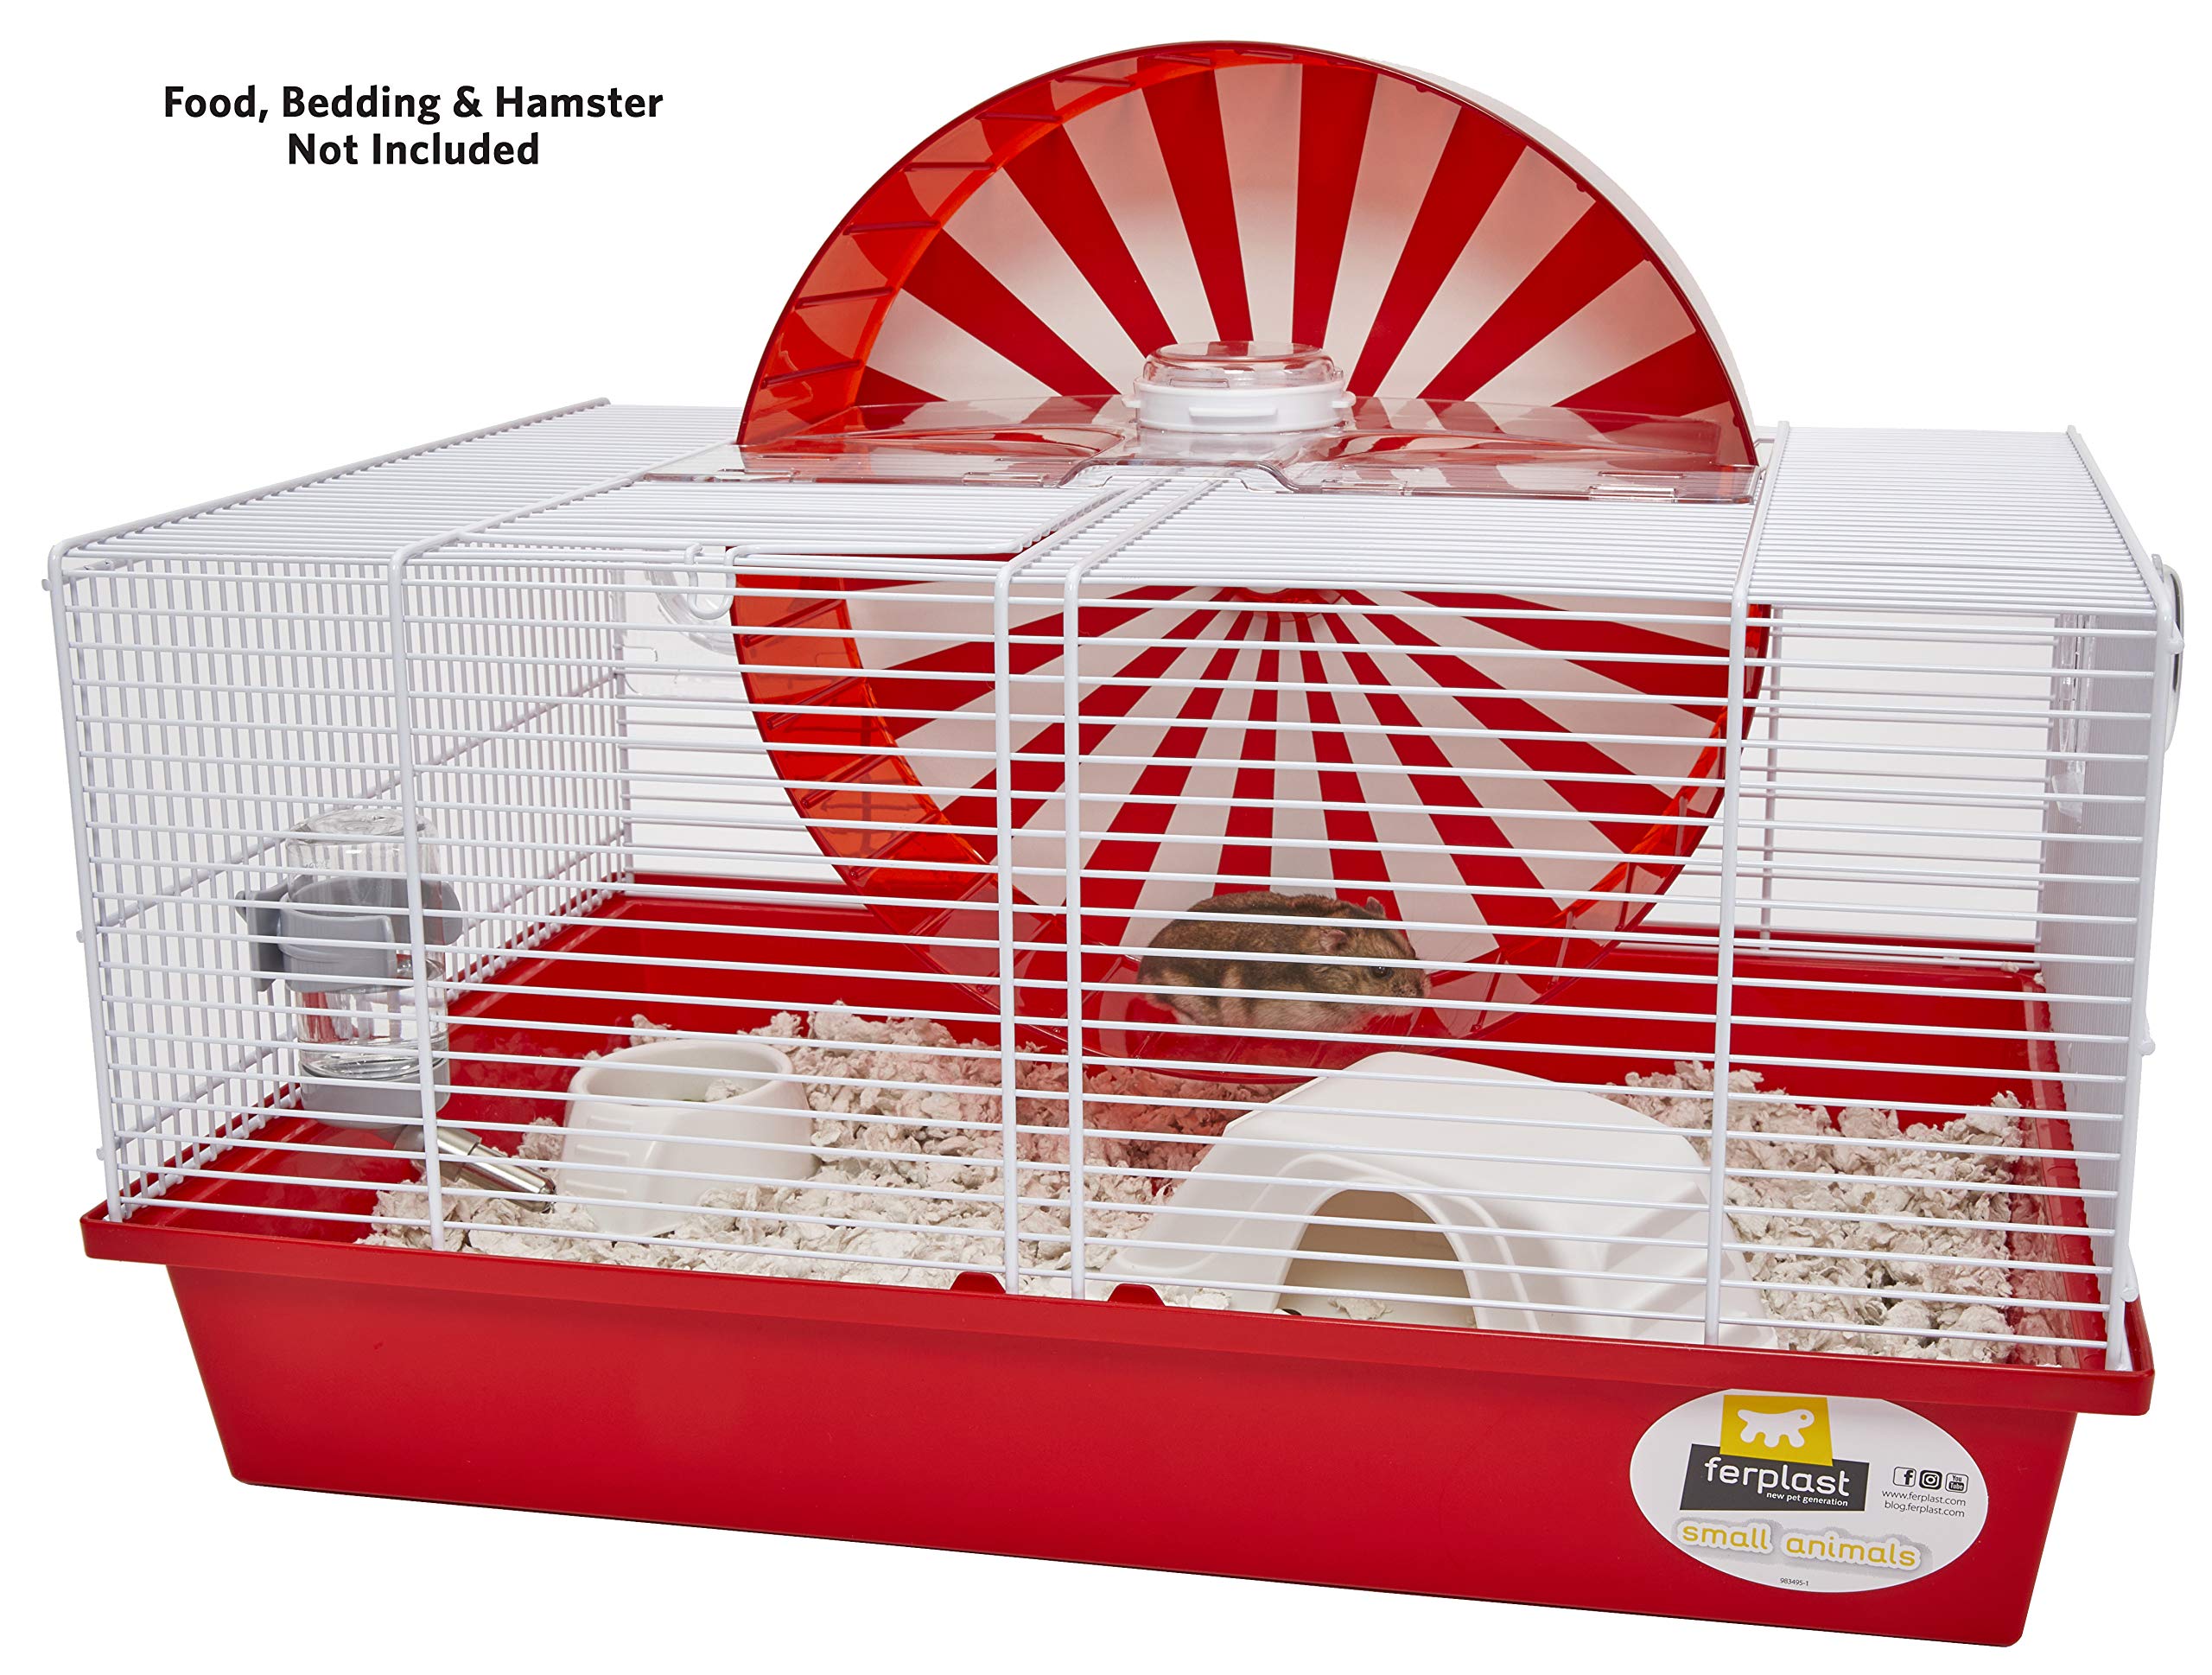 Ferplast Coney Island Hampster Cage includes Accessories - 20" X 13.8" X 9.8" Inches  